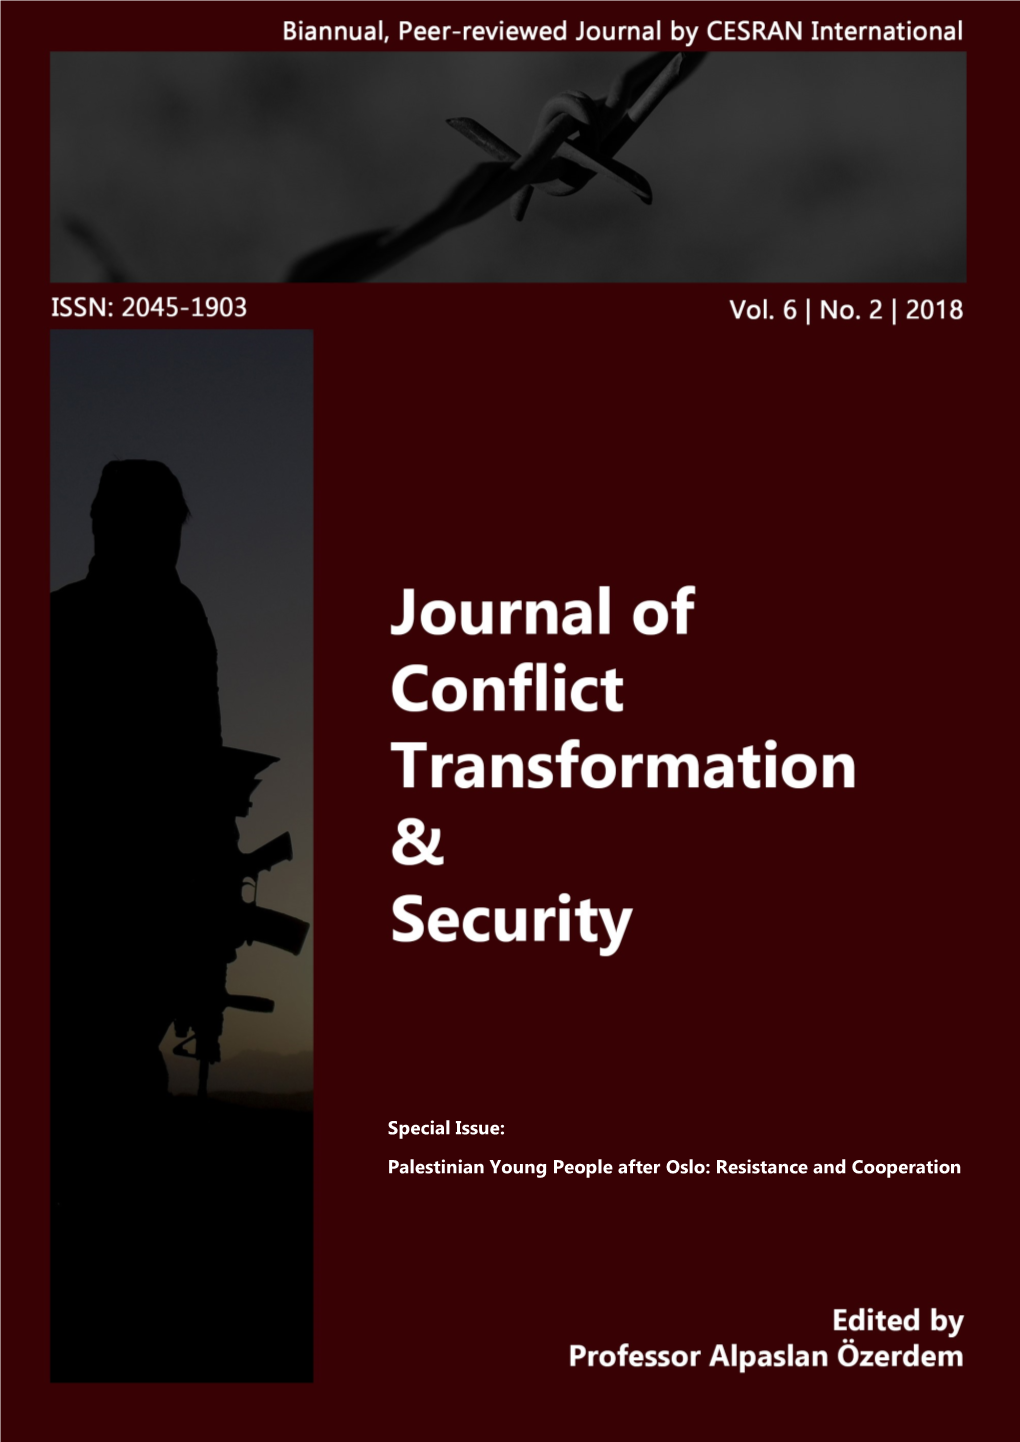 Journal of Conflict Transformation & Security